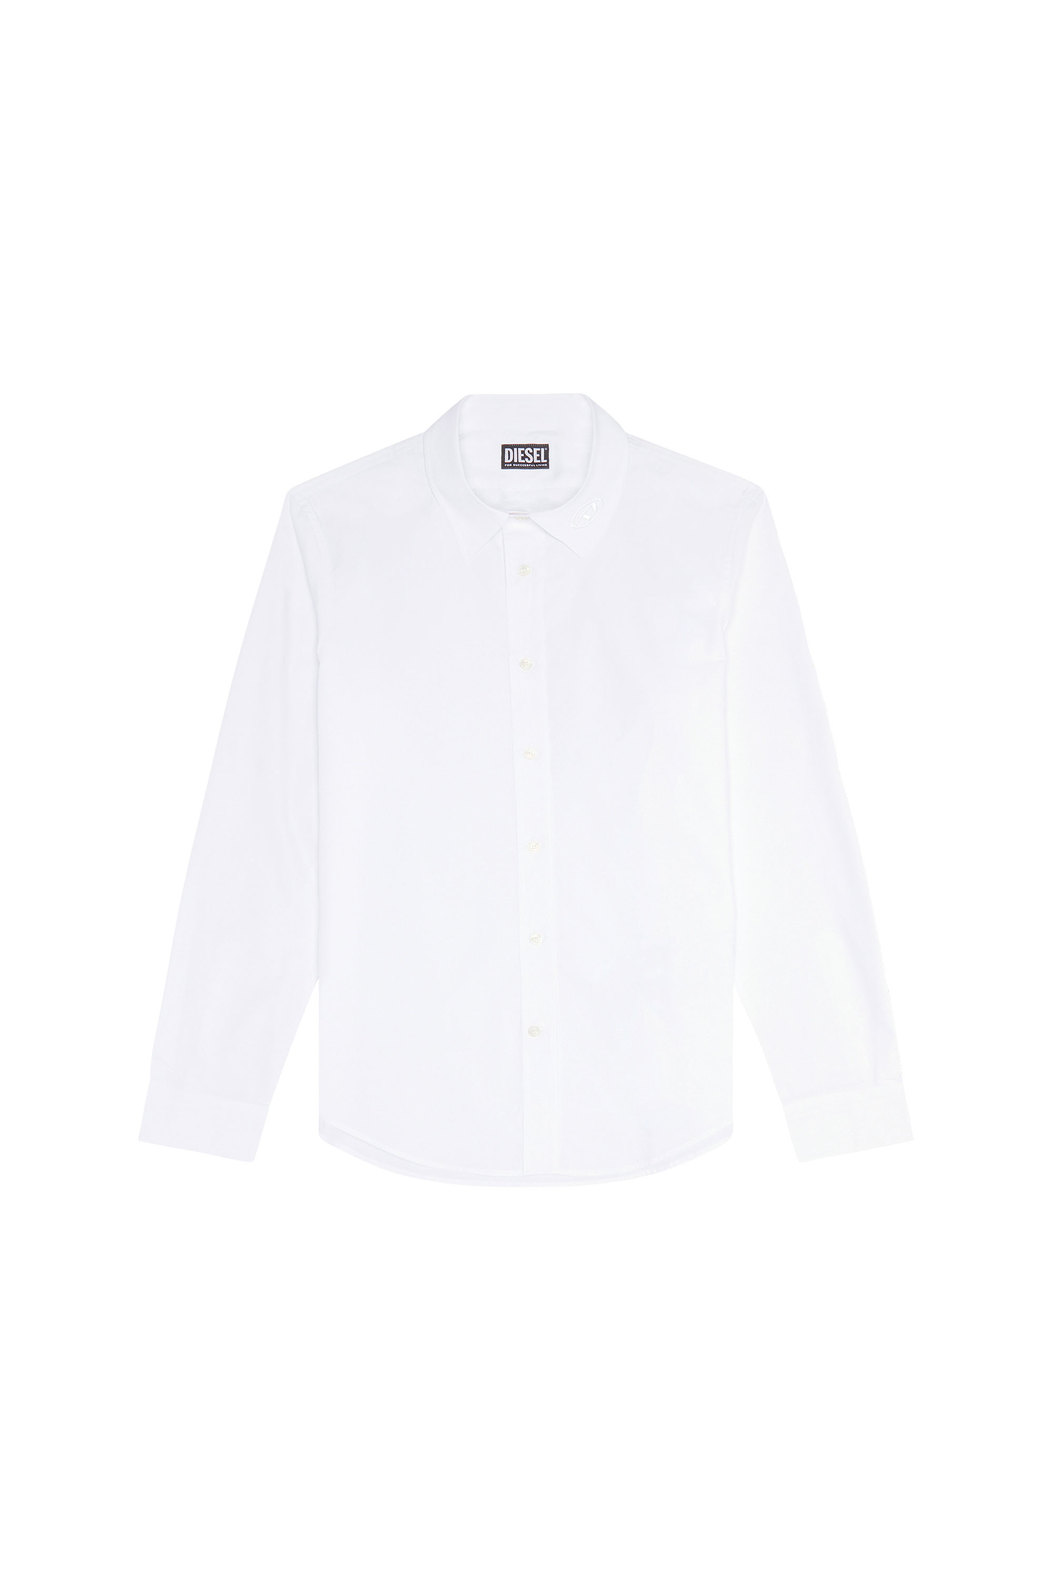 Cotton shirt with tonal logo embroidery